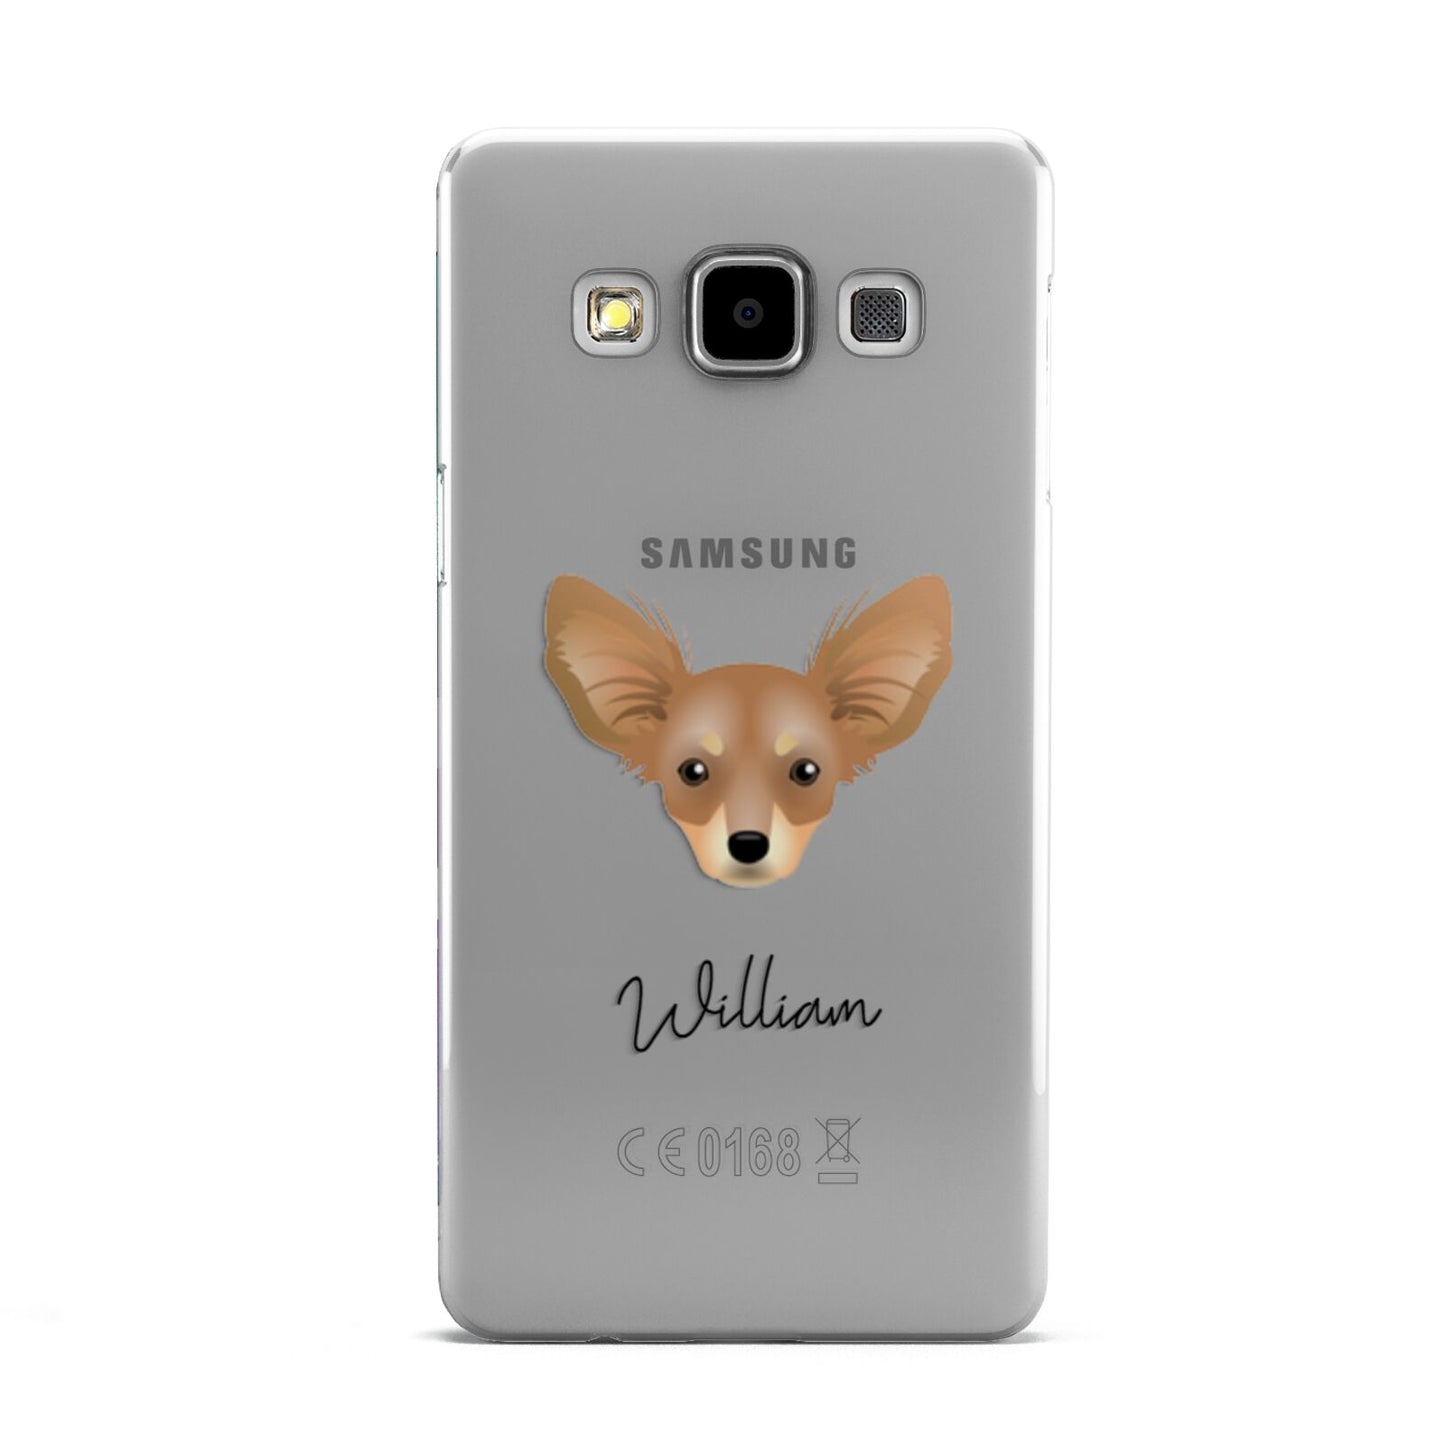 Russian Toy Personalised Samsung Galaxy A5 Case